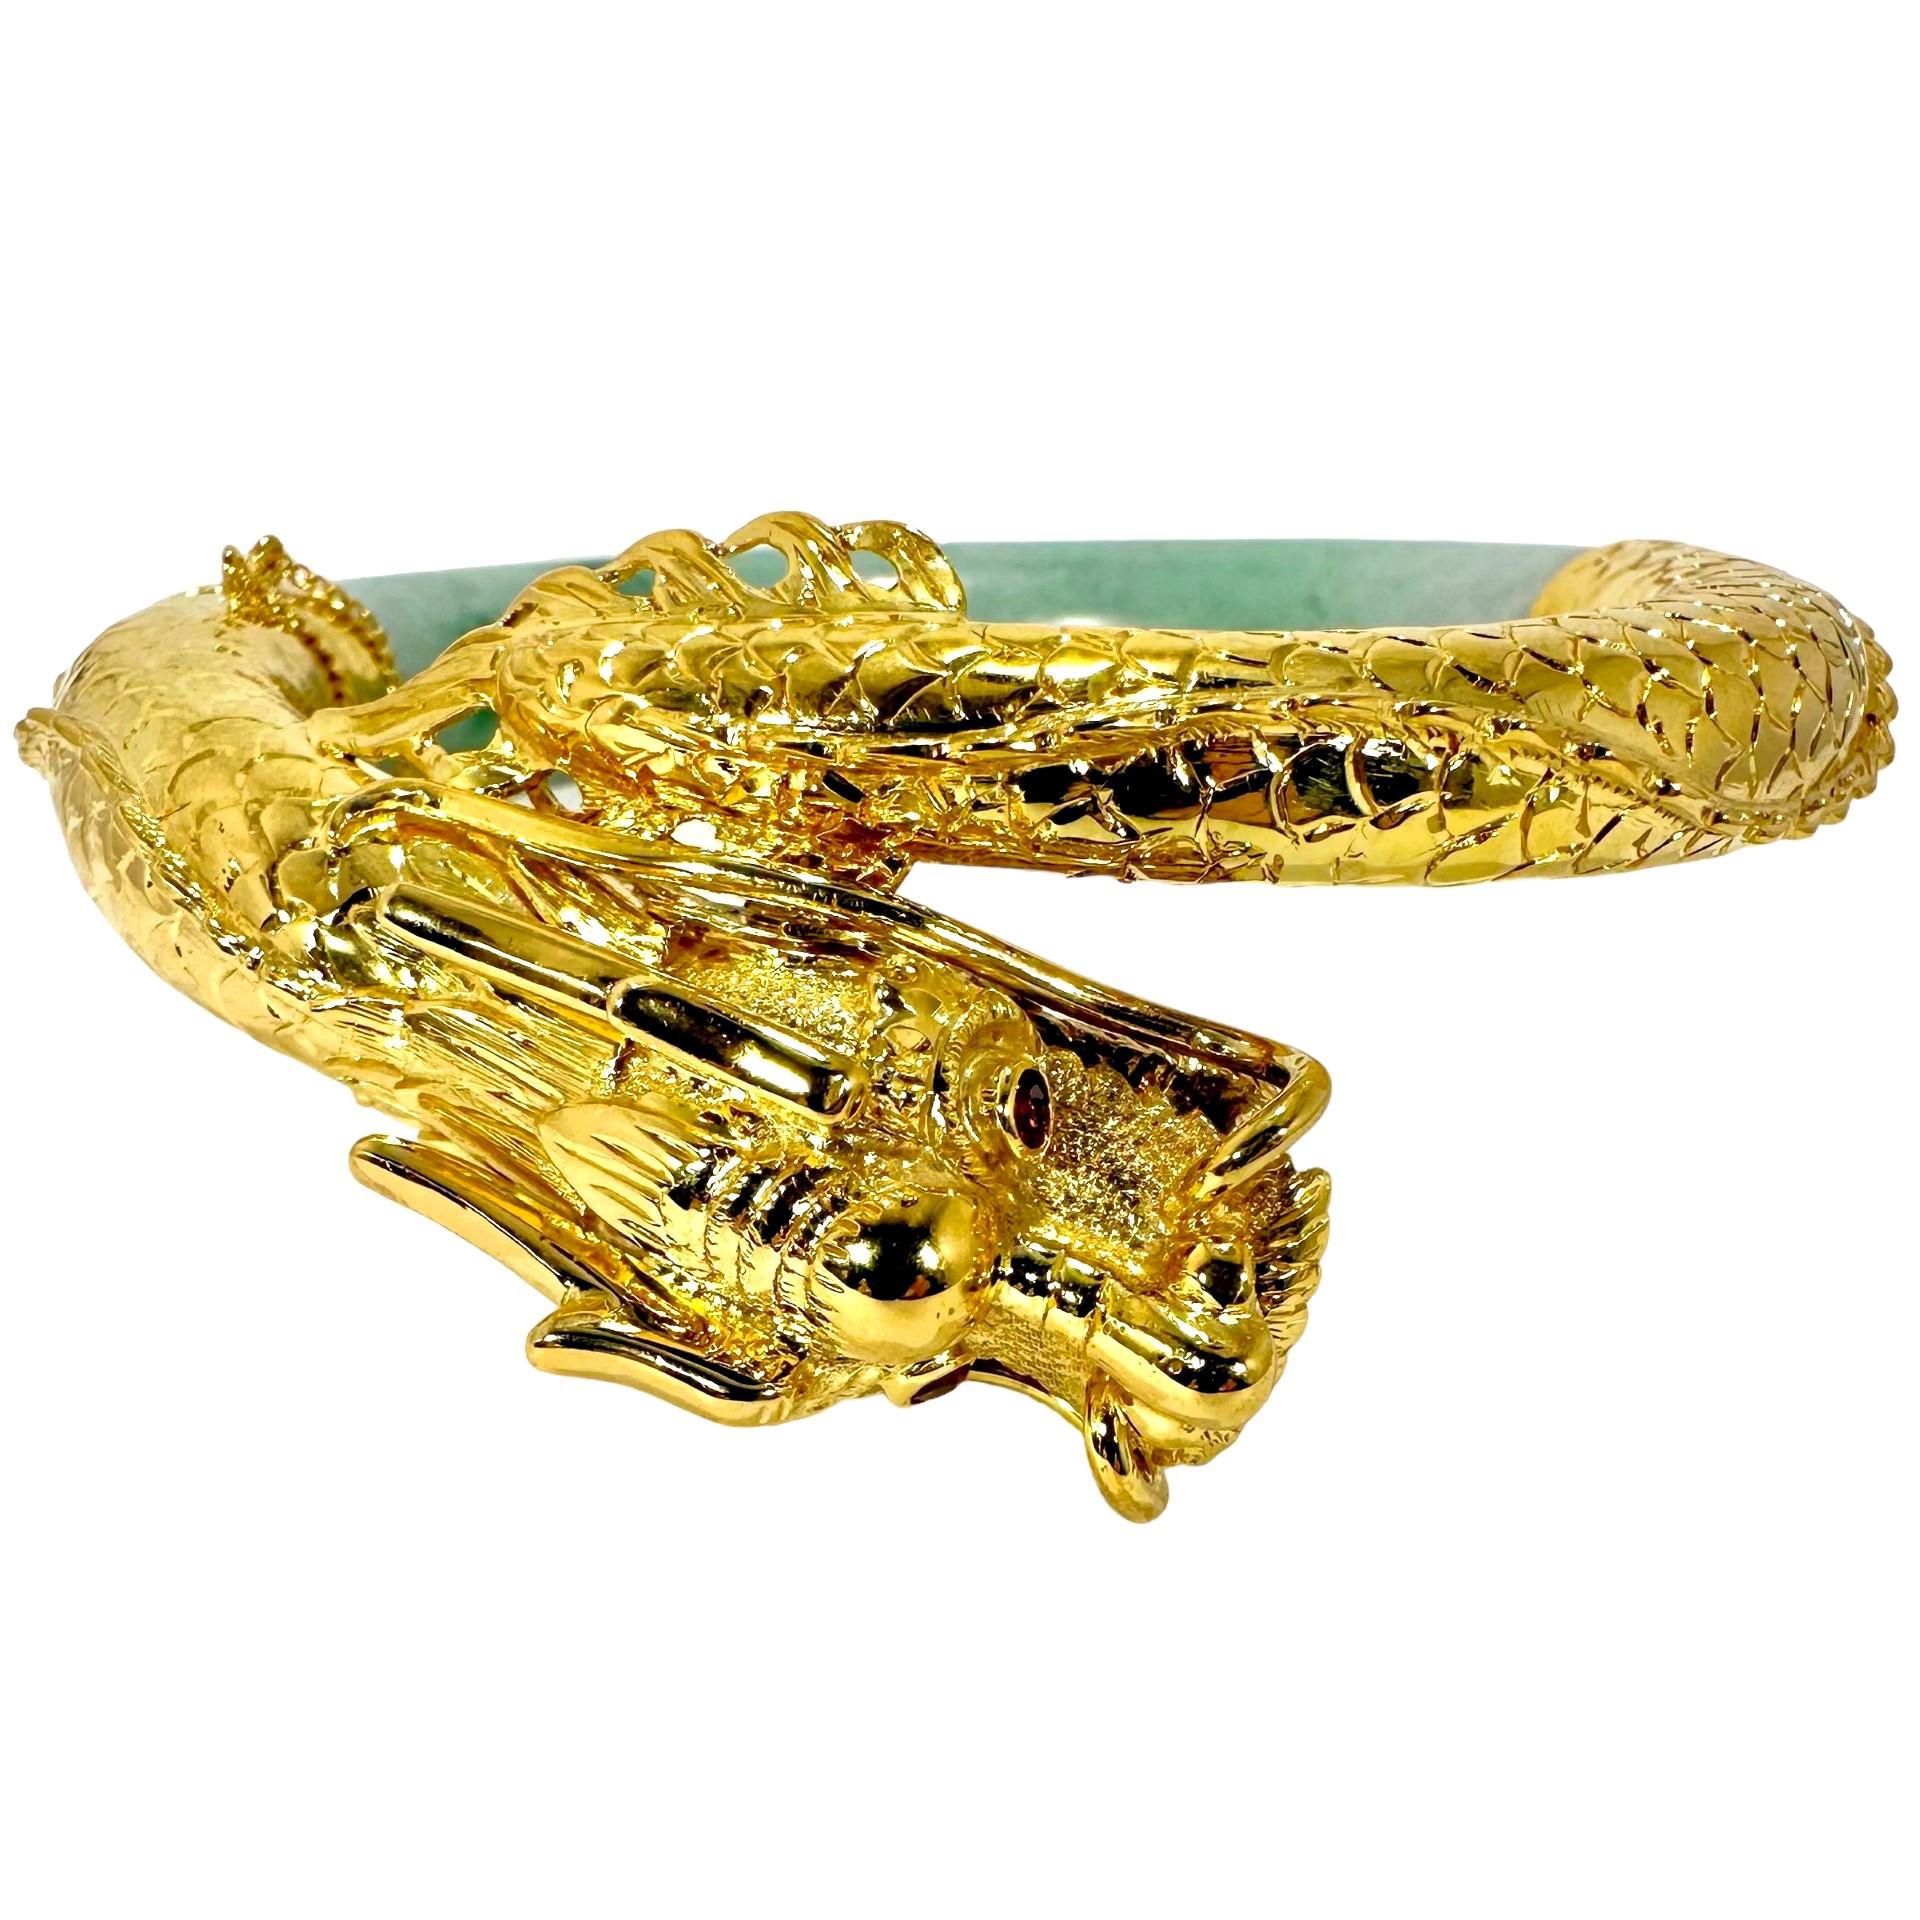 This strikingly beautiful and exquisitely hand crafted vintage bracelet features an intricately and expertly created dragon caricature, replete with ruby eyes. An incredible amount of attention has been paid in the execution of the dragon's head and